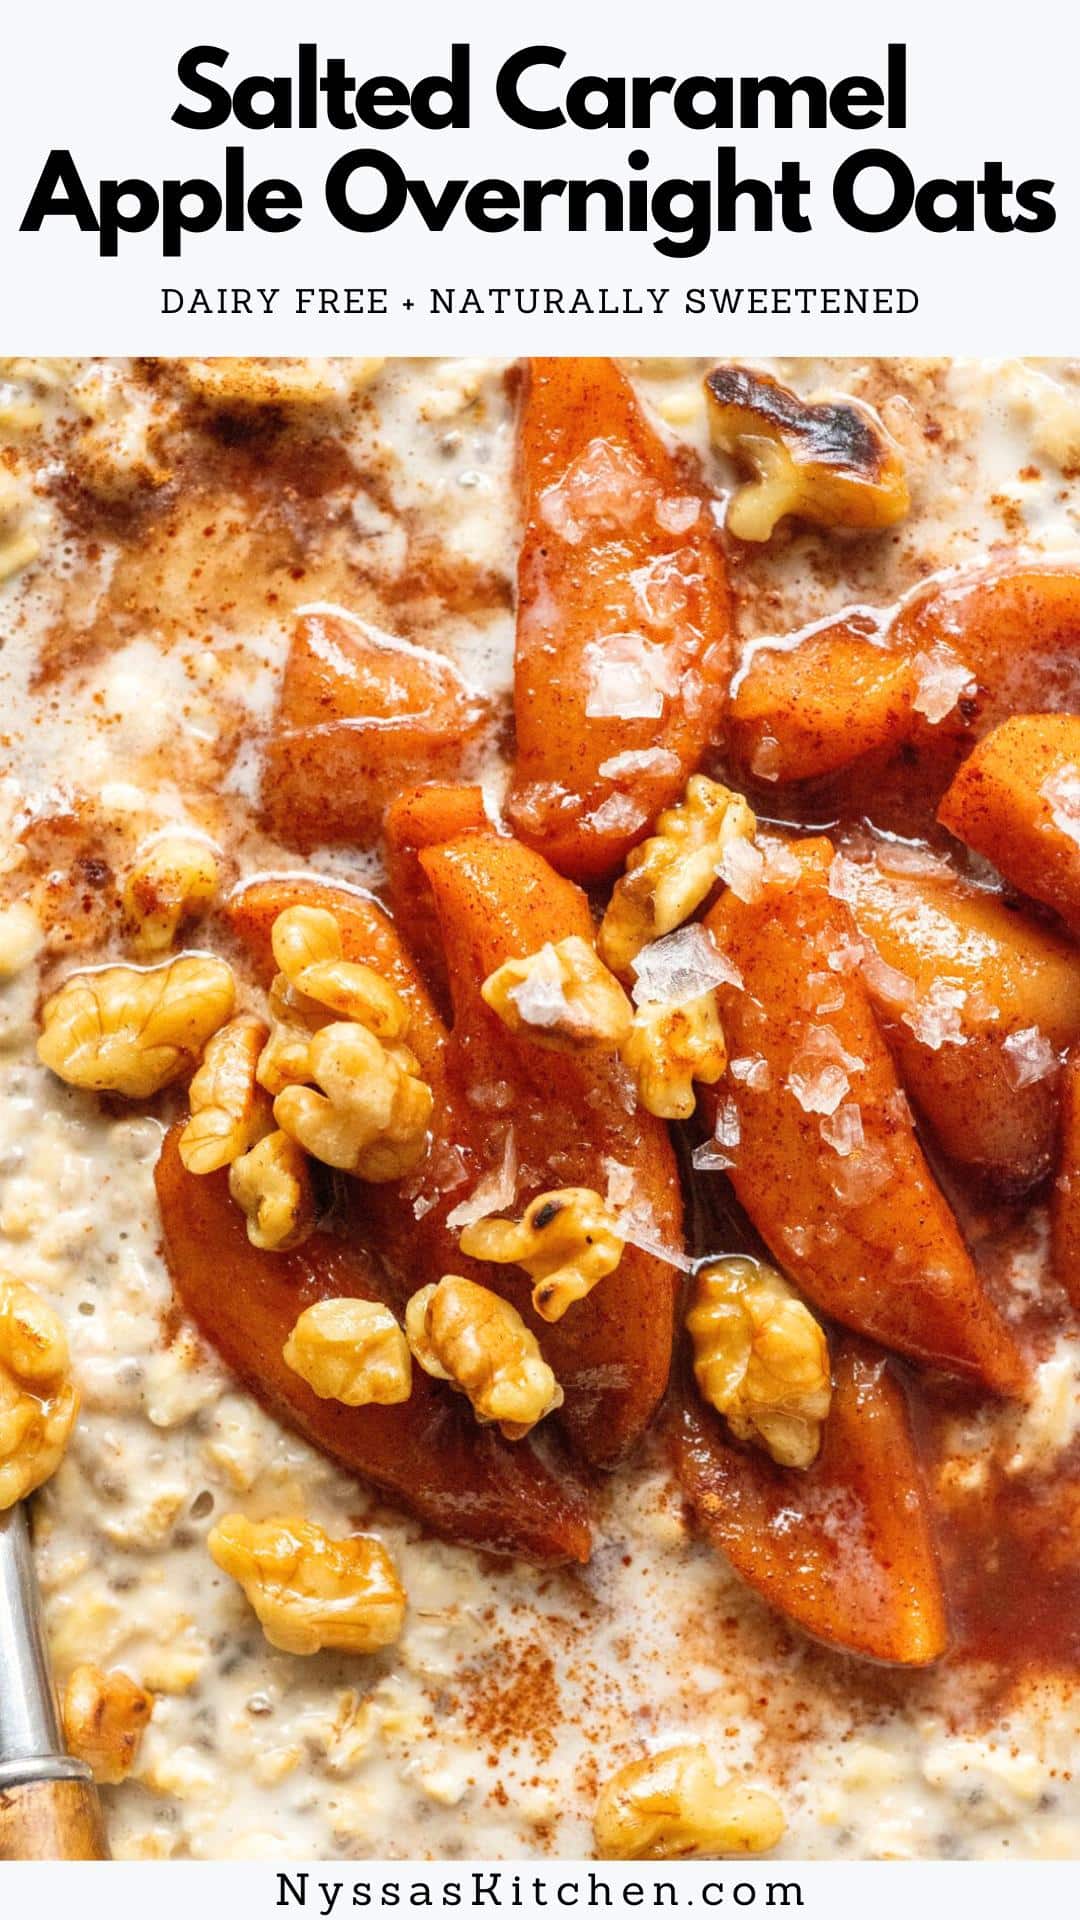 These salted caramel apple overnight oats are a delicious and healthy breakfast recipe that is dairy free, naturally sweetened, and gluten free! Made with mouthwatering baked cinnamon apples, gluten free oats, non dairy milk, cinnamon and vanilla. A breakfast so yummy you're sure to fall in love.